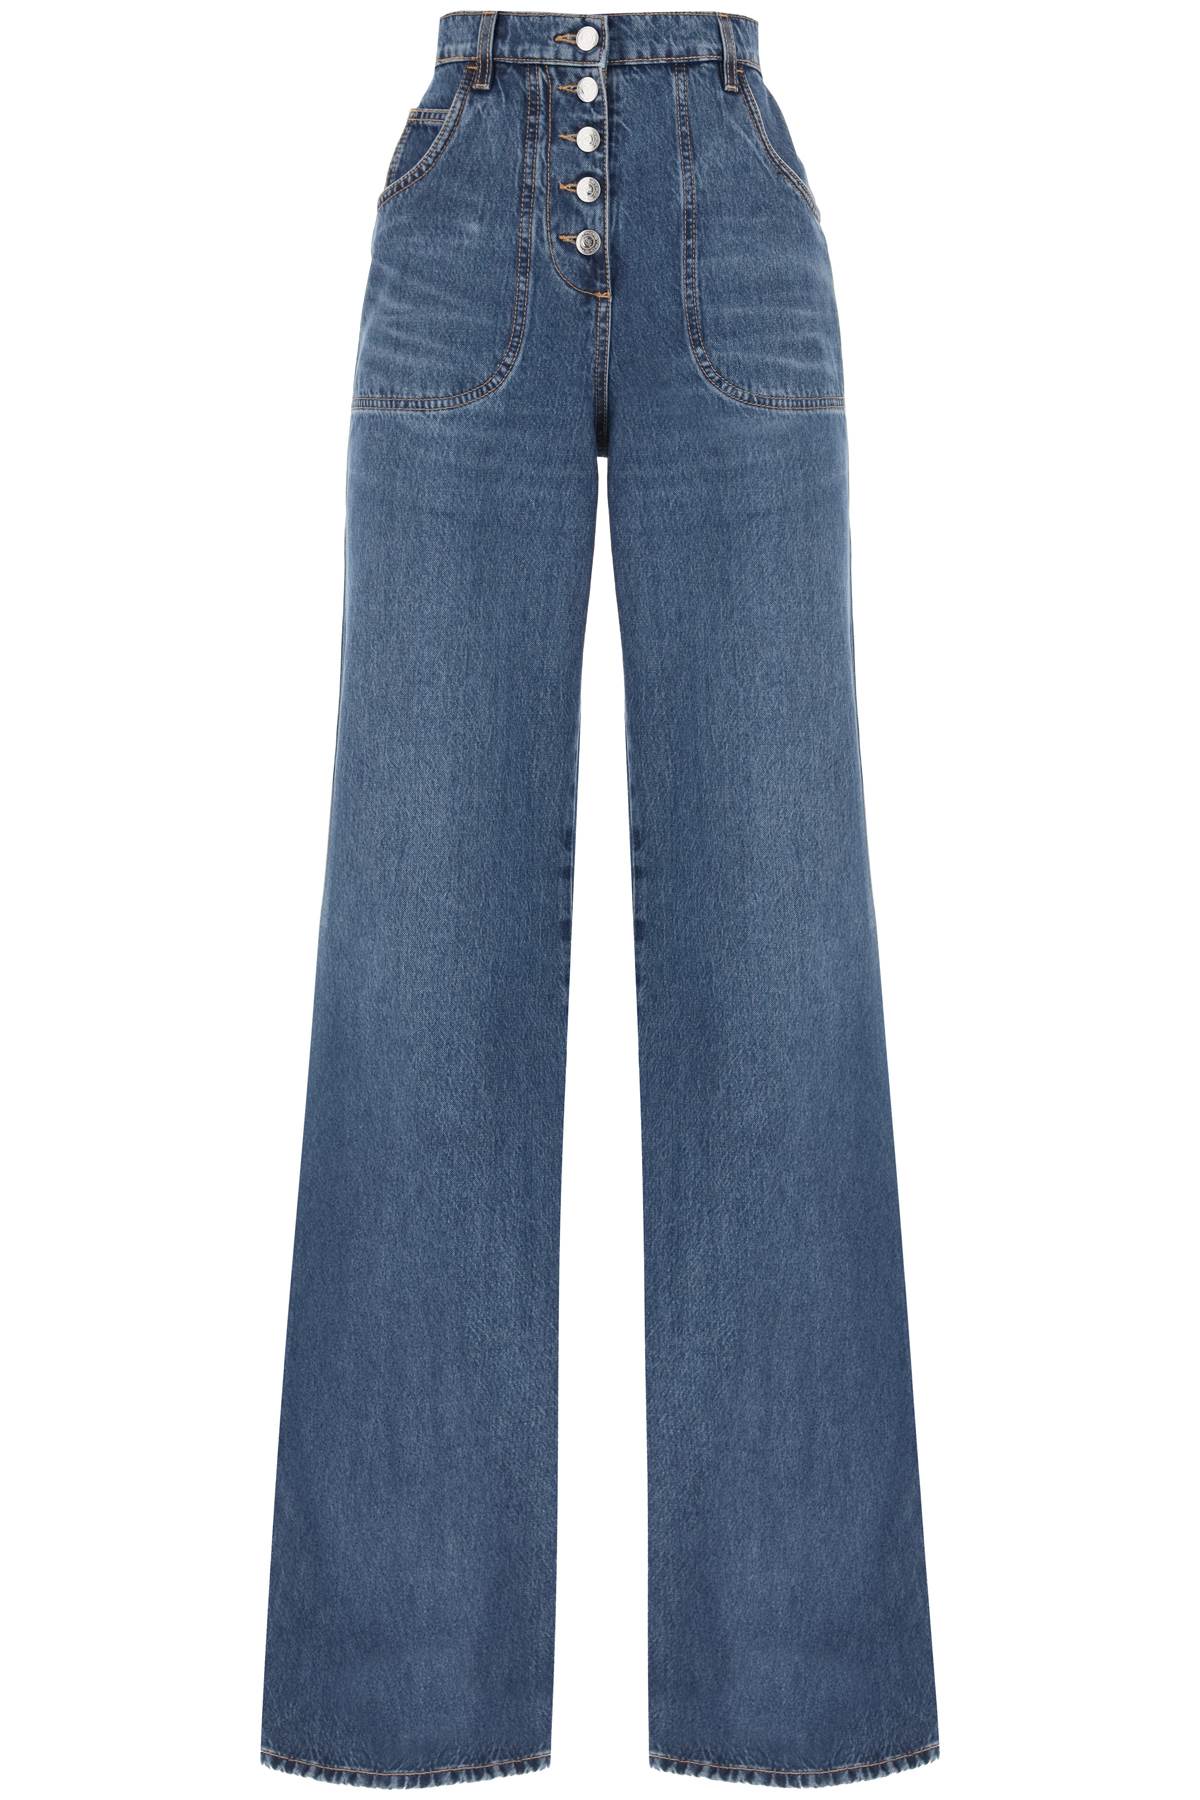 Etro jeans with back foliage motif-0